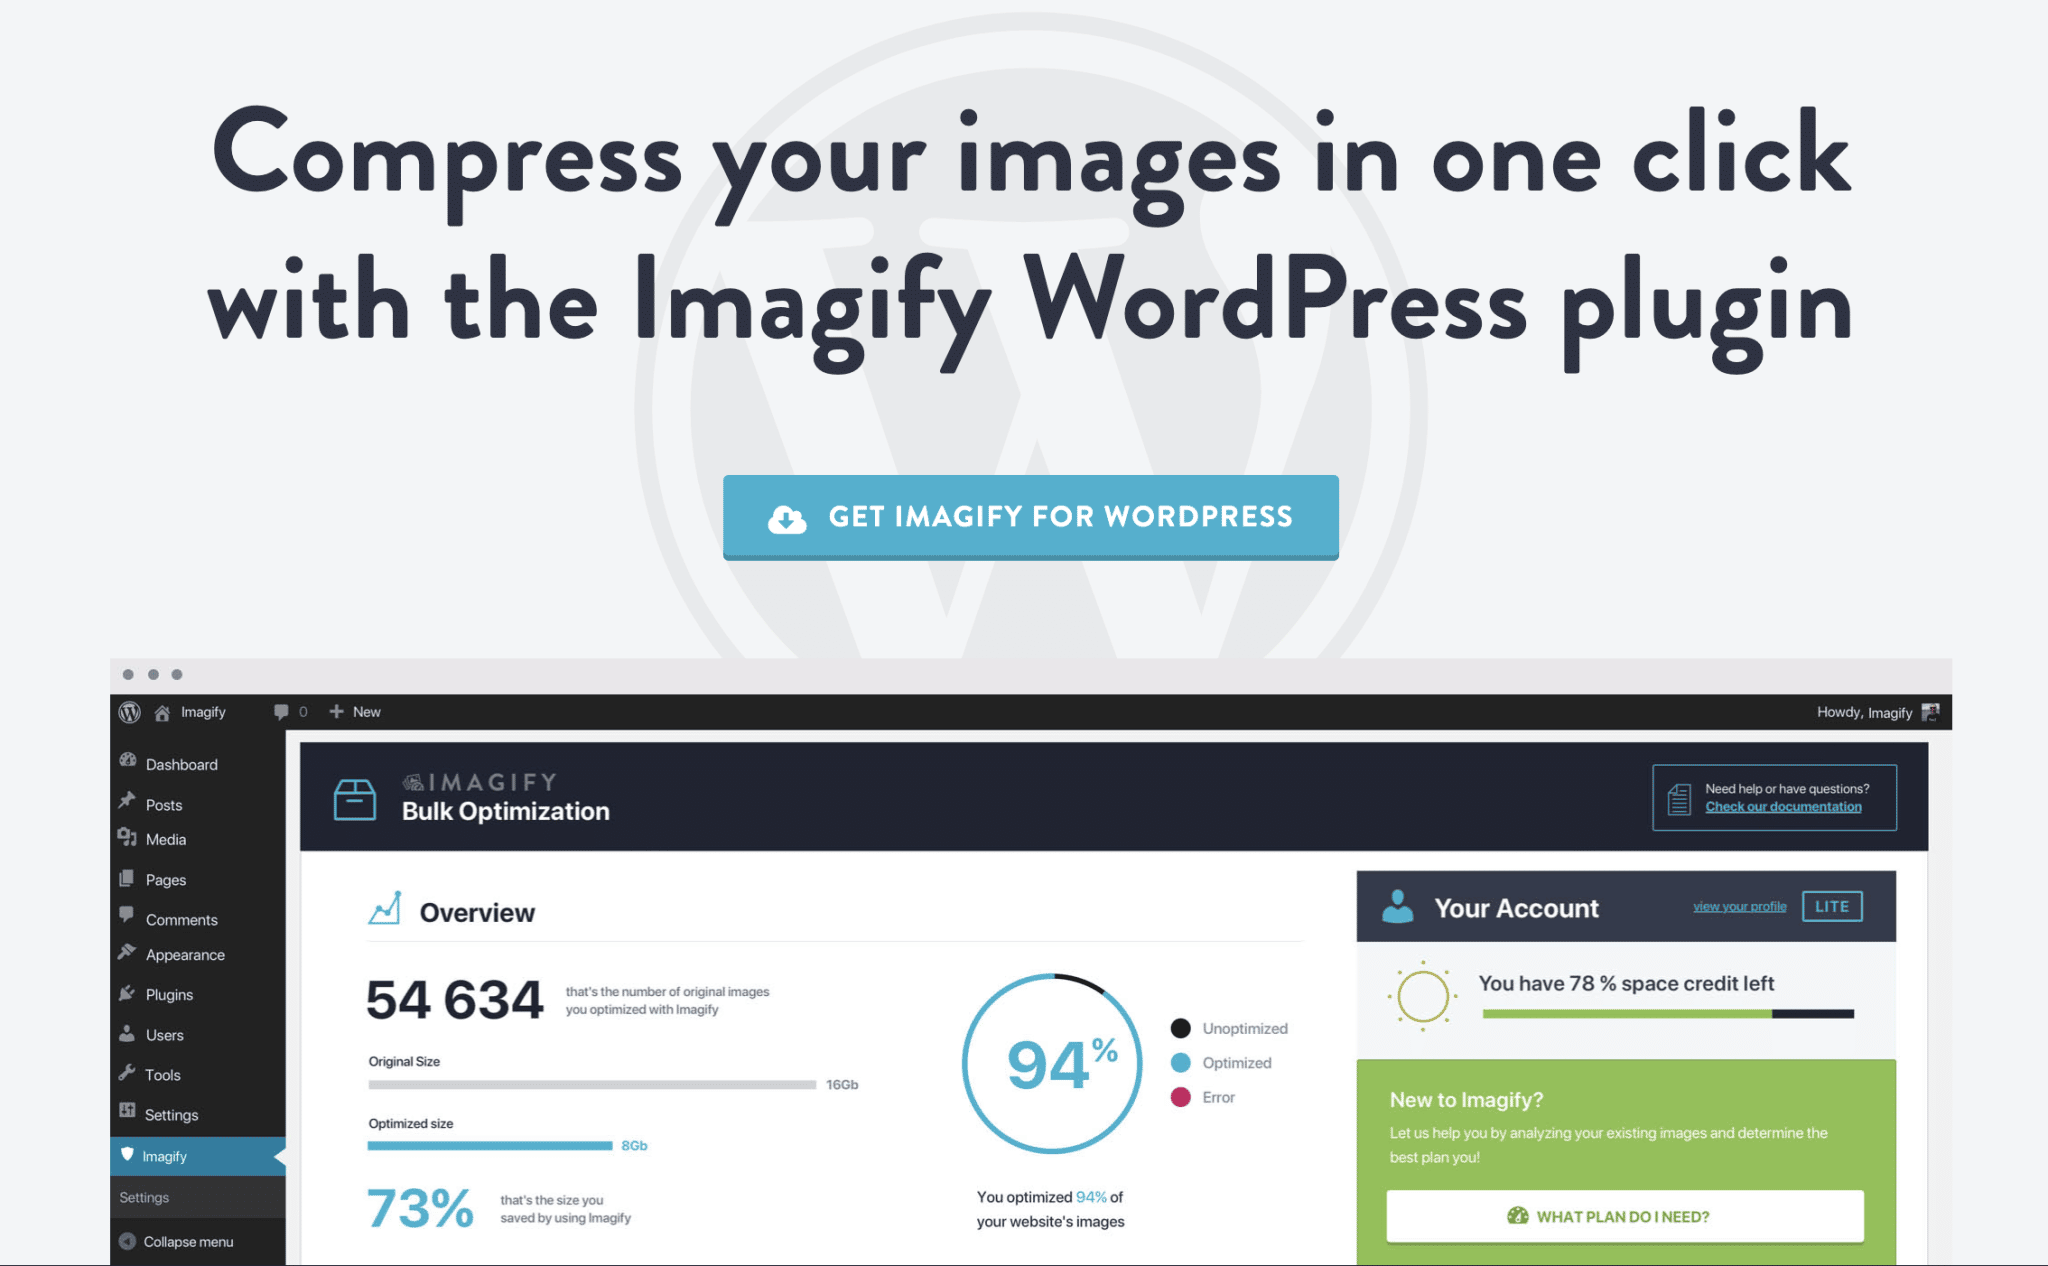 Imagify allows you to optimize the images on your WordPress site.